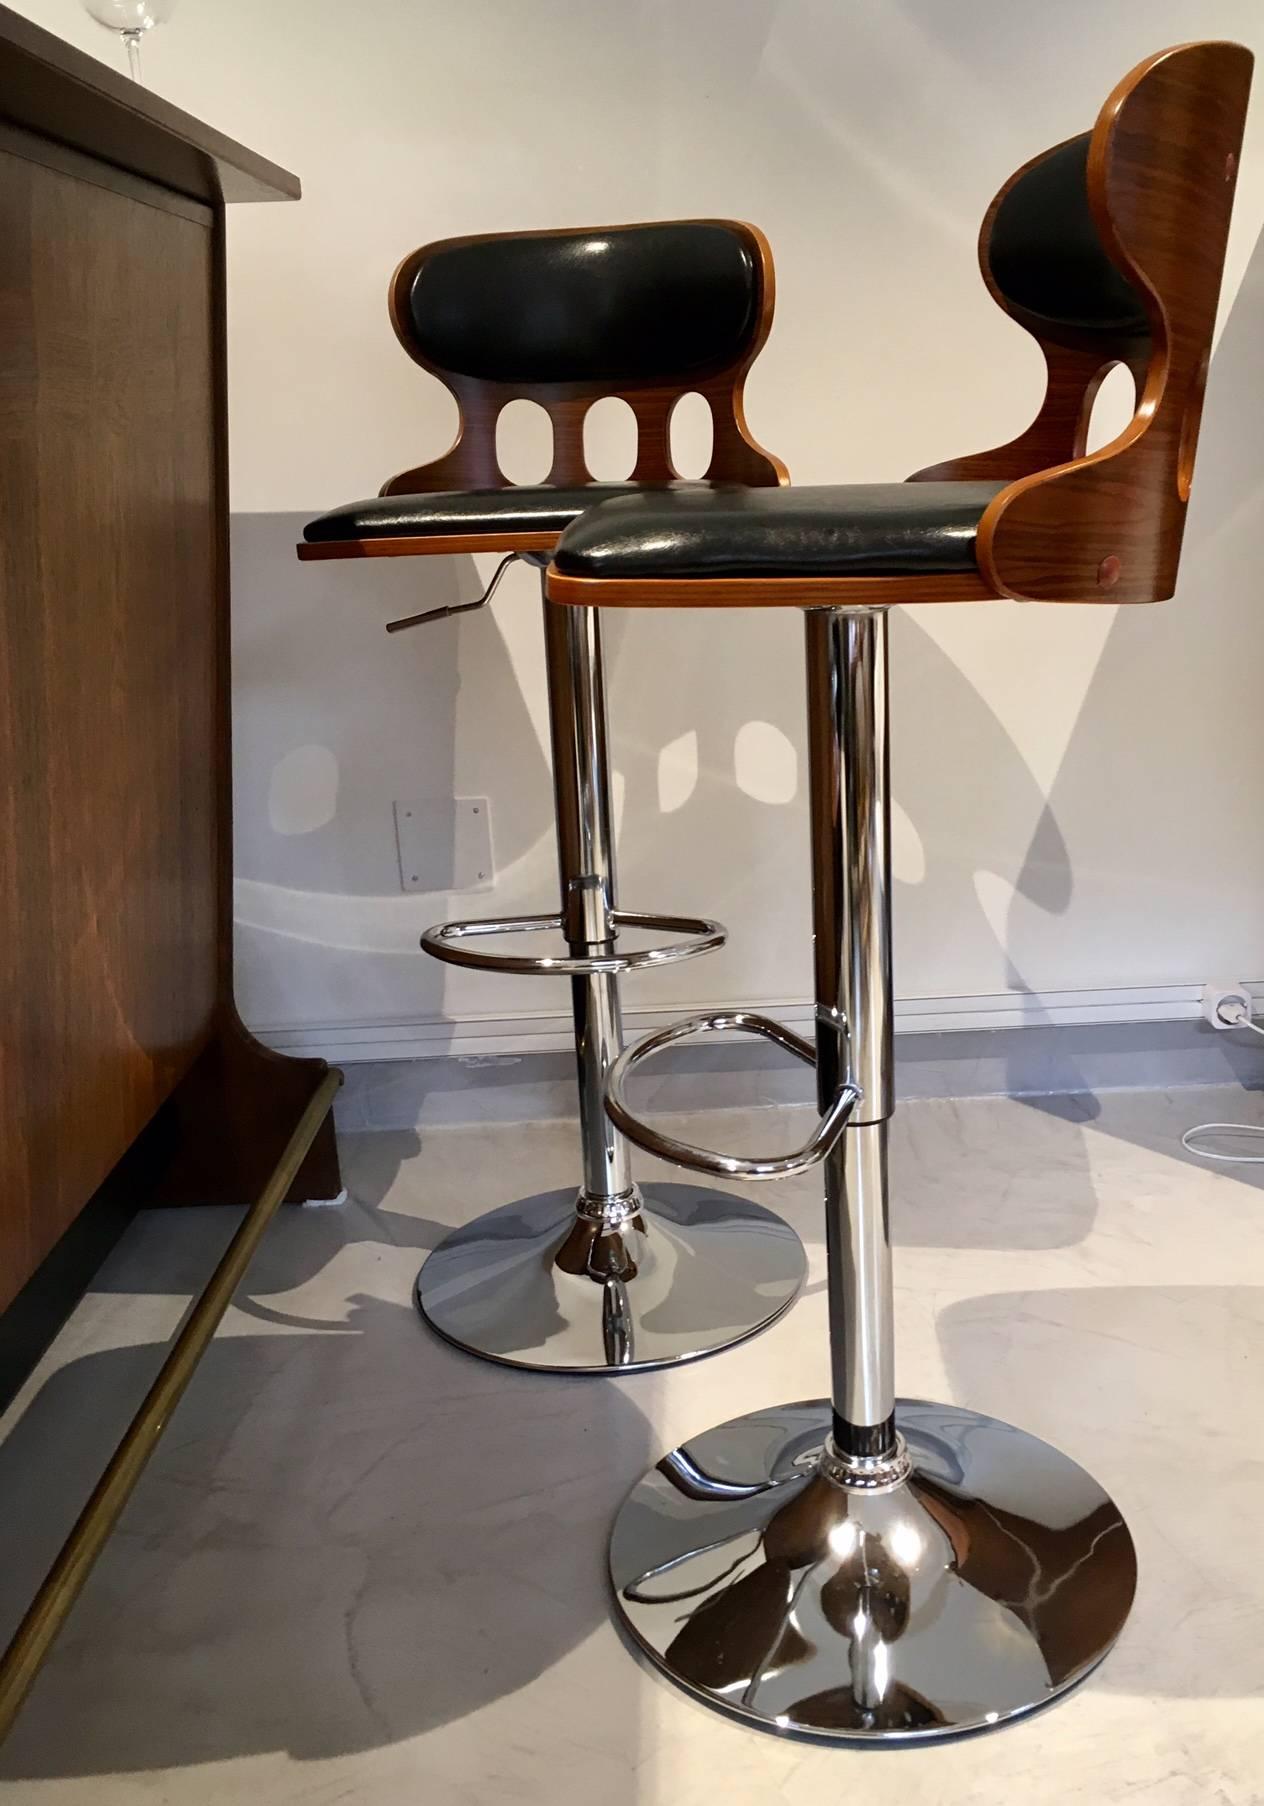 Two high chromed metal bar or kitchen stools with black faux leather seat upholstery and brown wood veneer exterior. Seat increase or decrease height 80/60 cm.